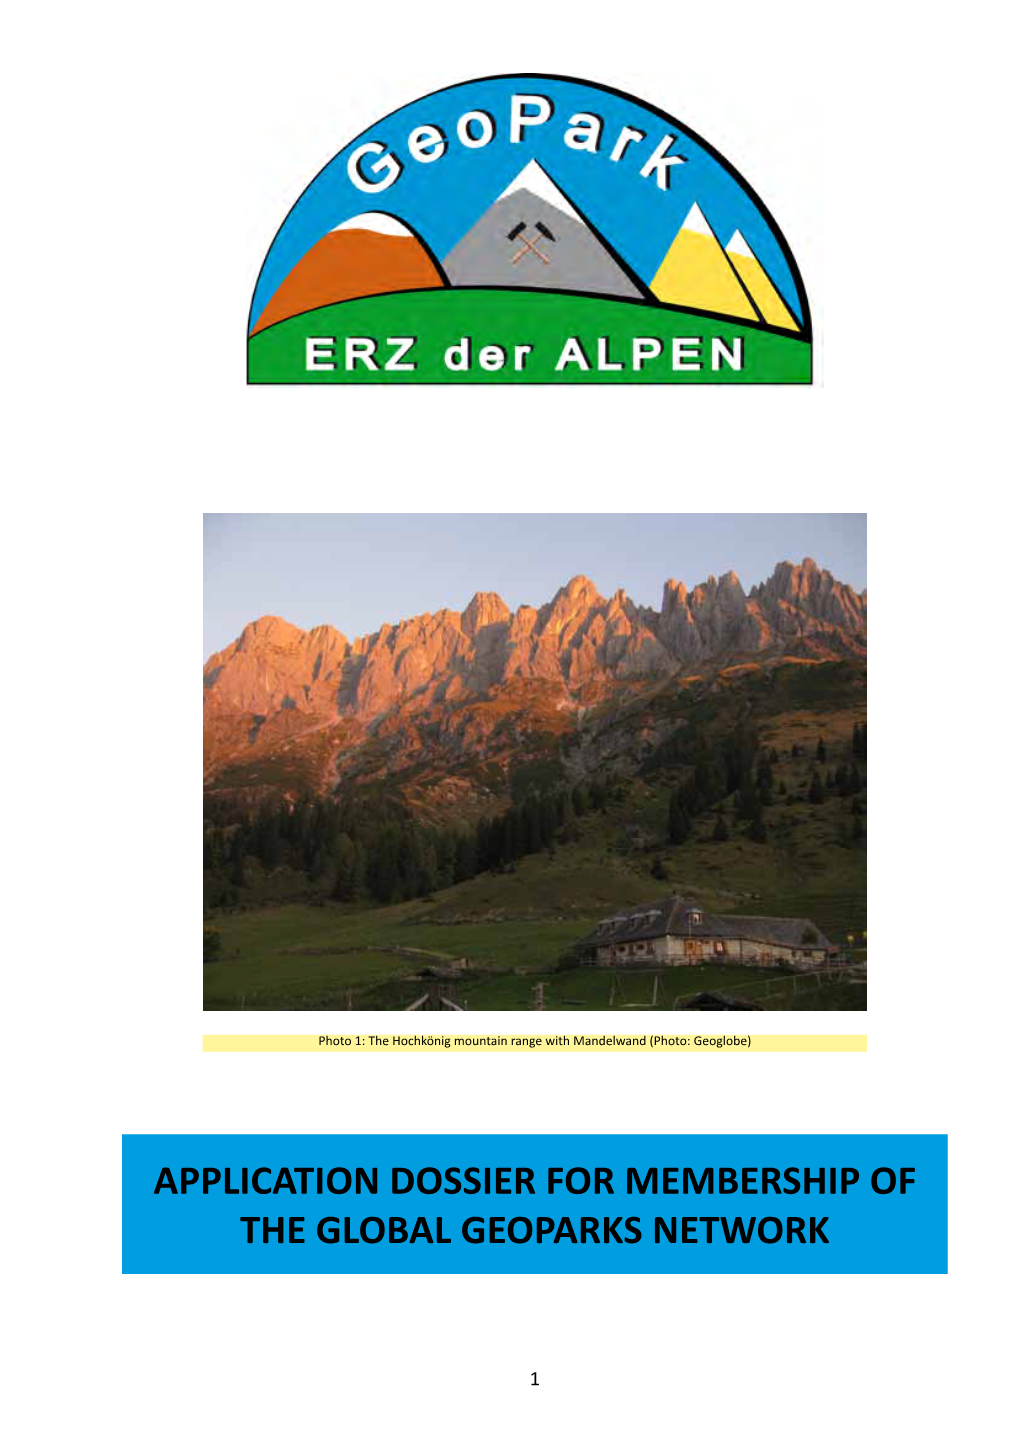 Application Dossier for Membership of the Global Geoparks Network